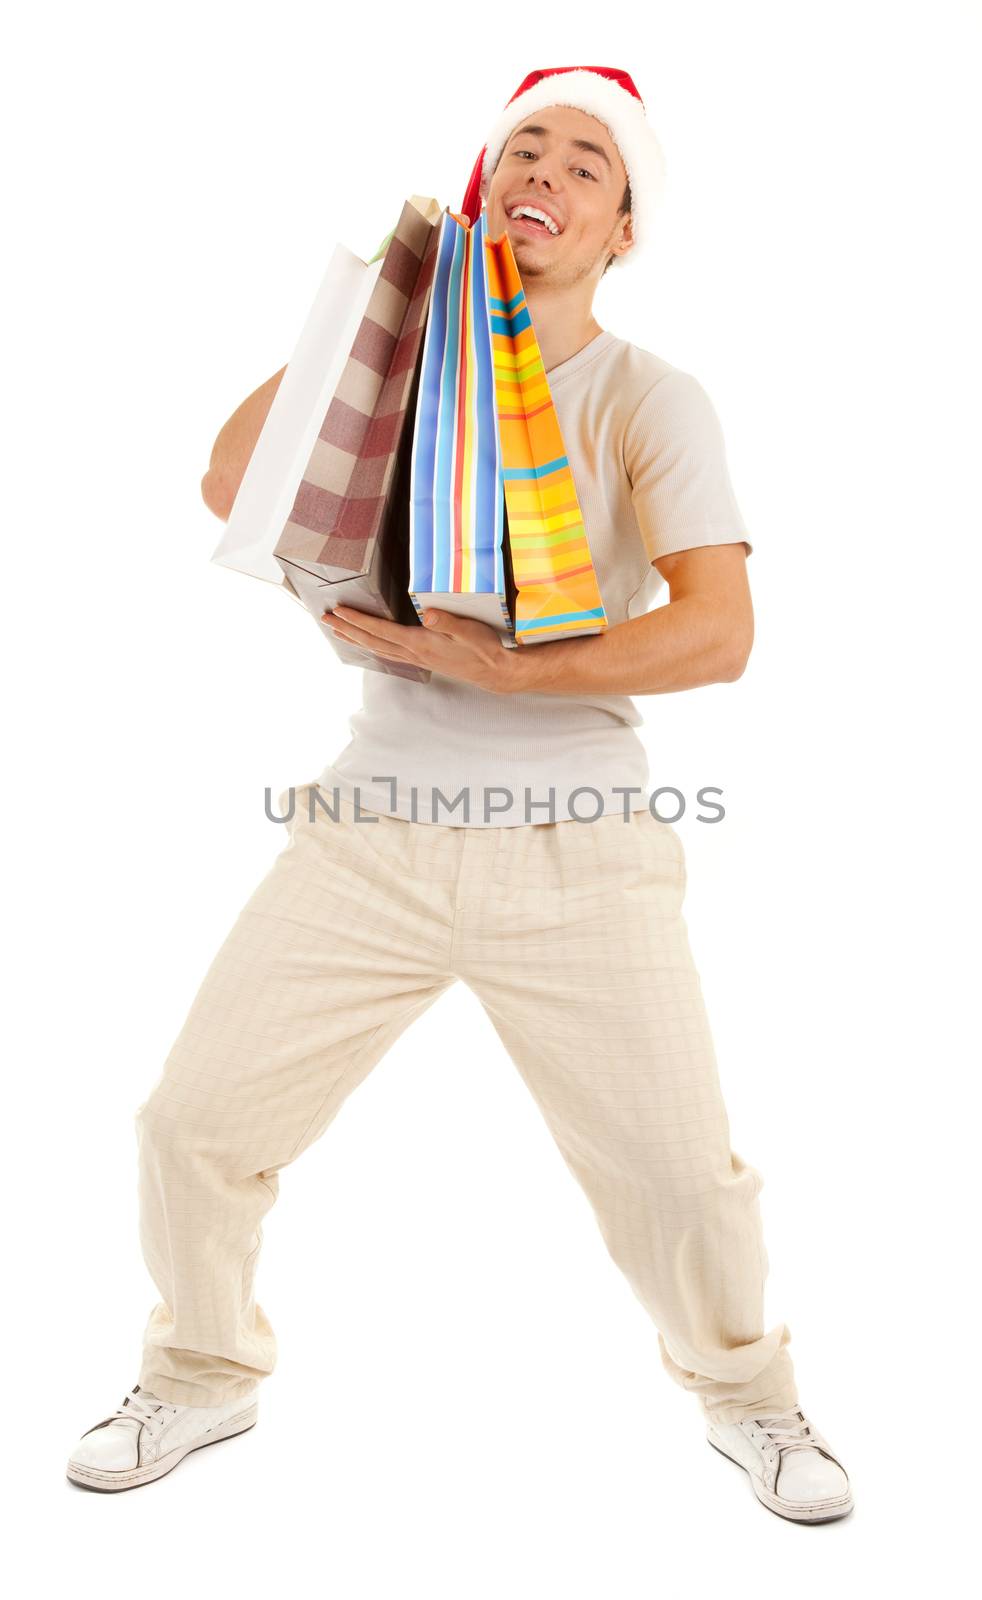 Young Santa with heavy purchases in paper bags on white background